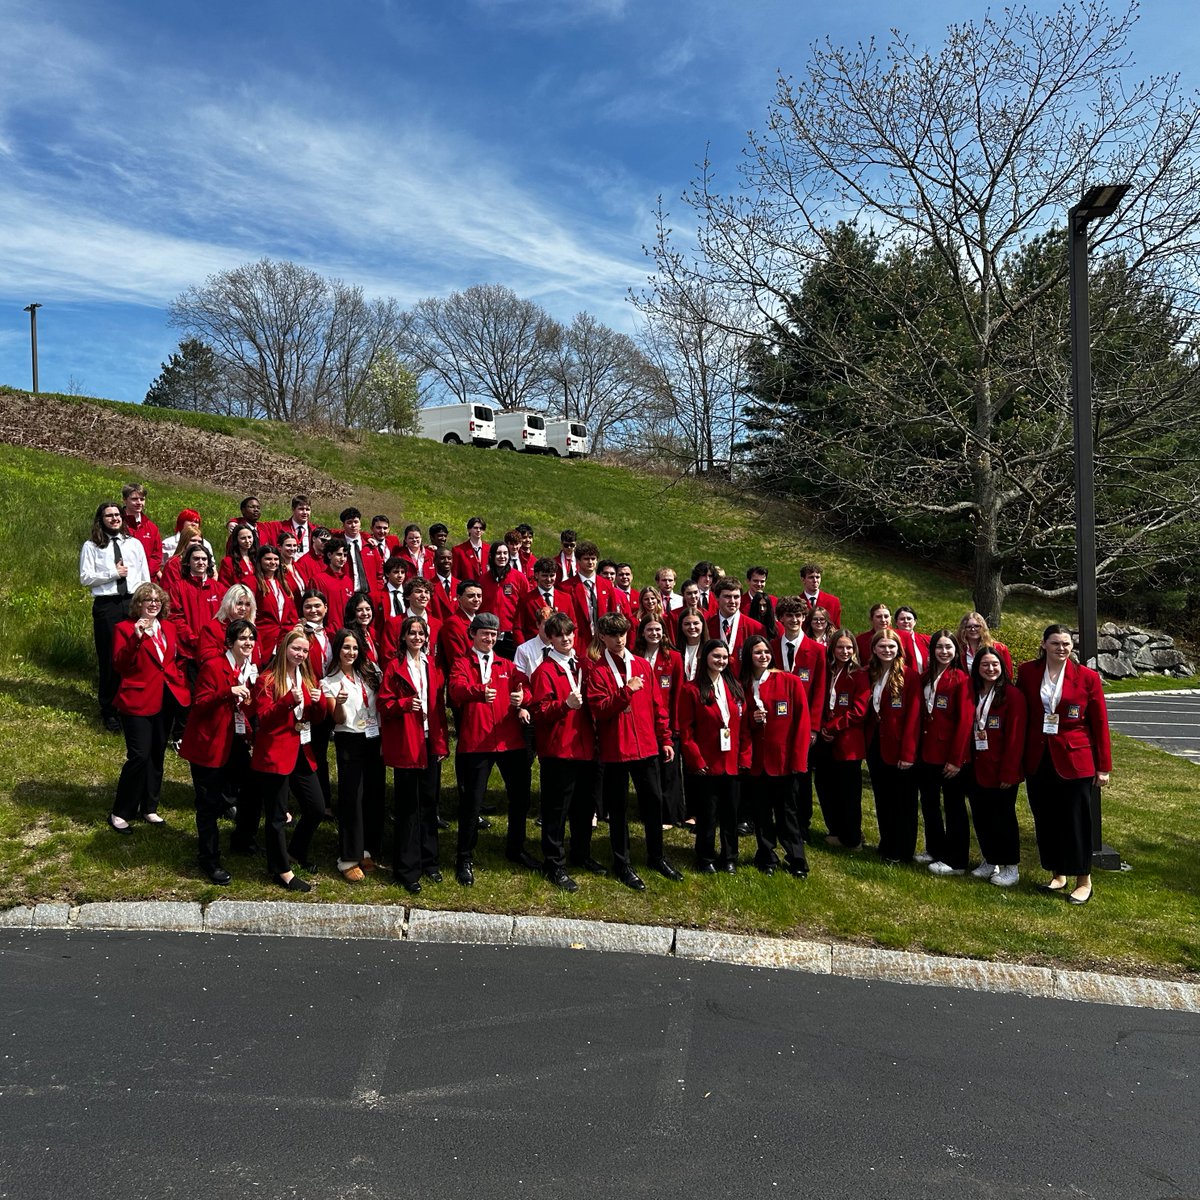 #ShawTech is proud to celebrate our 56 talented students who competed at @maskillsusa states! We are elated to share that 28 of them came home with medals: 16 Gold, 3 Silver, 9 Bronze! This is a new #PB for @shawsheenskills! #WayToGo #WeAreShawsheen @shawsheenclubs @maskillsusa